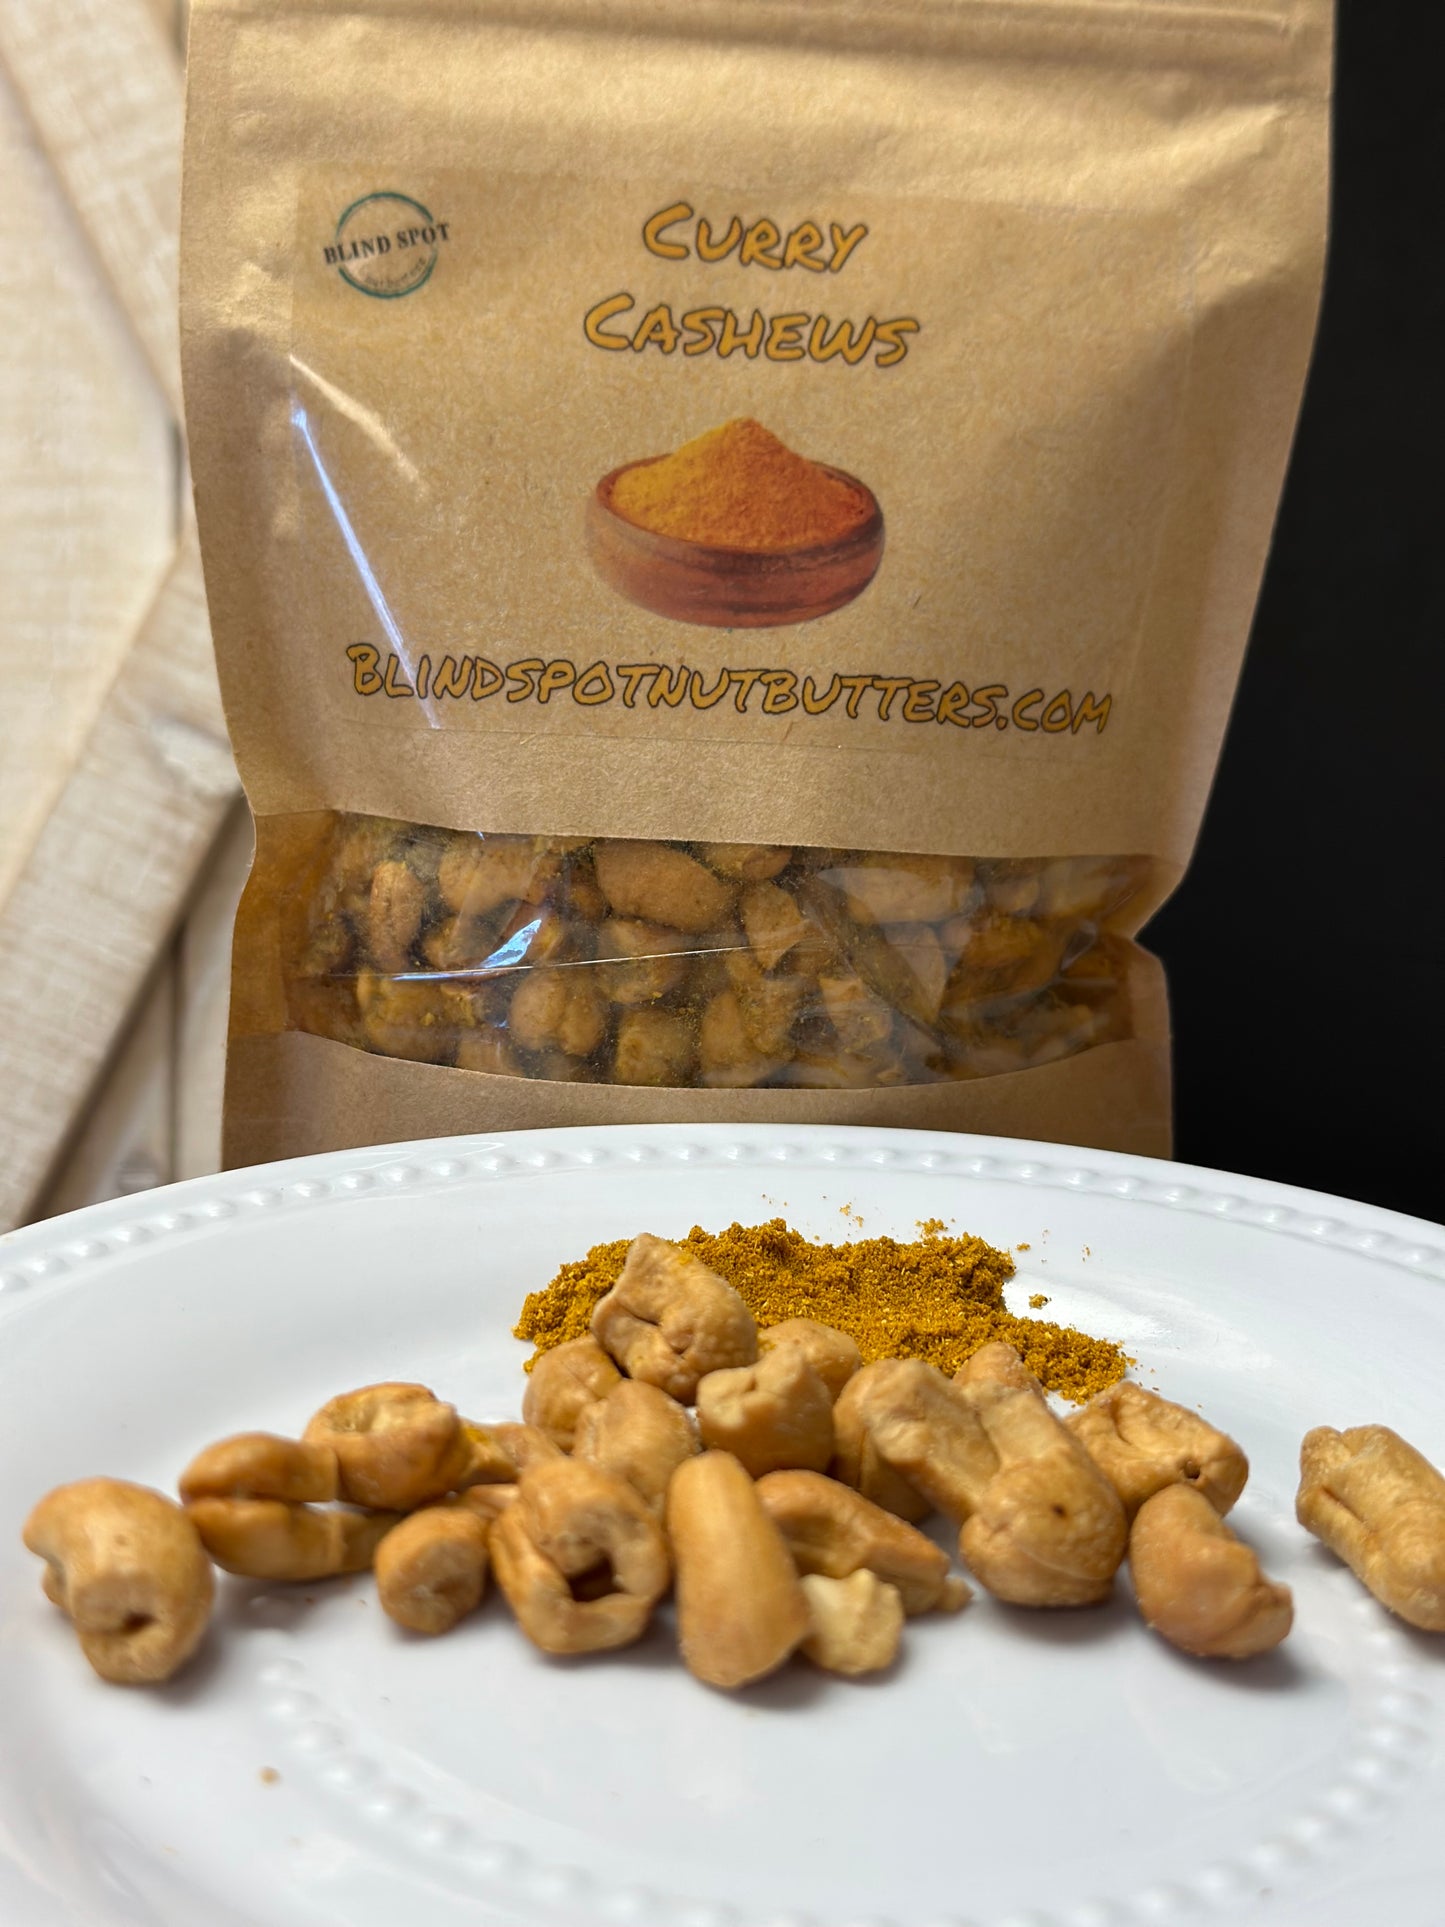 Curry Flavored Cashews, Amazing Savory Flavor!!